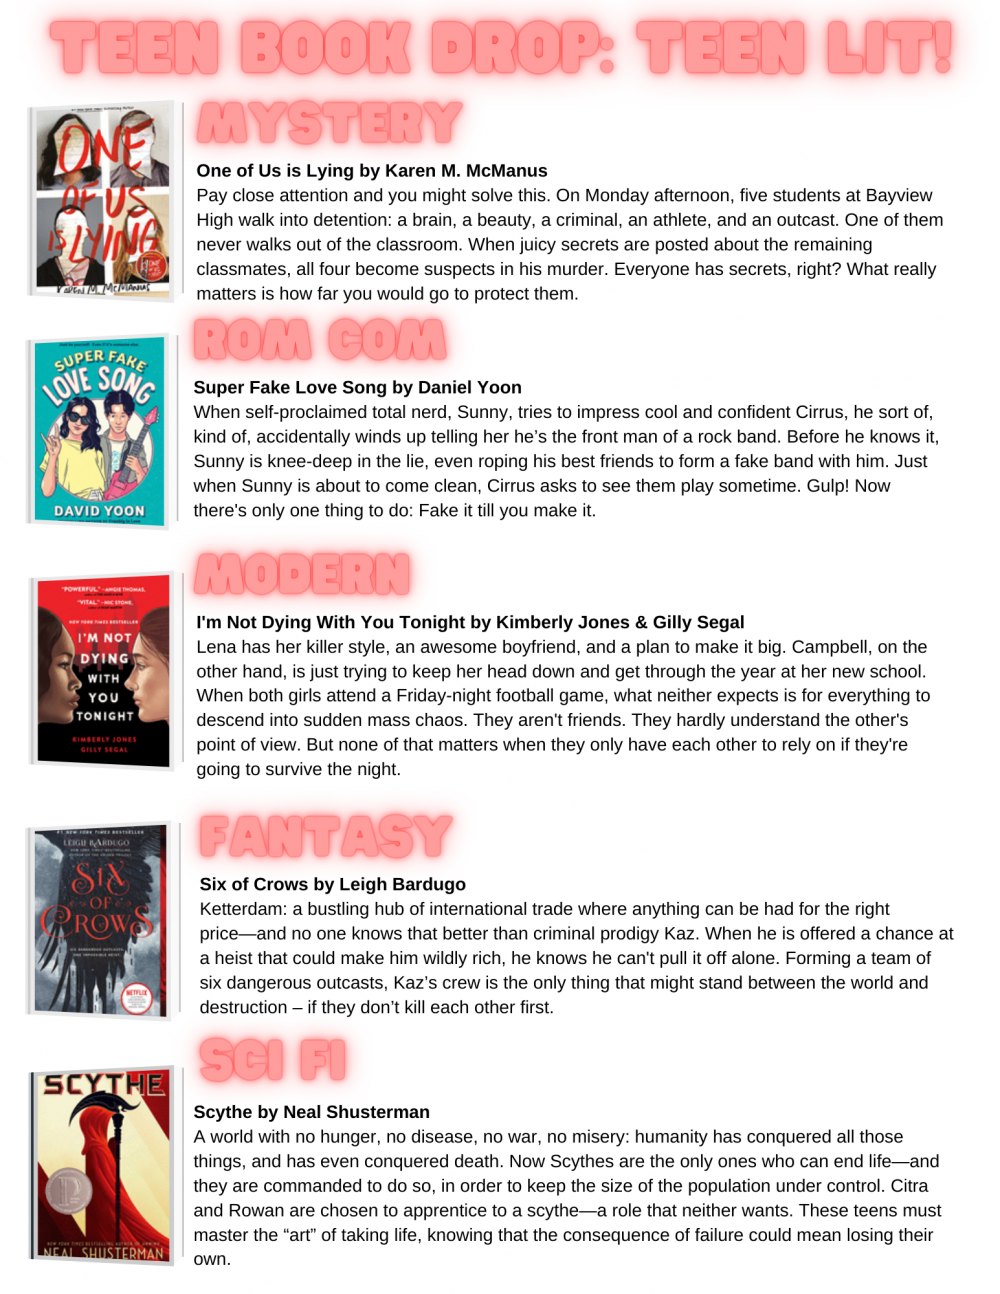 The 5 book choices are: One of Us is Lying (mystery), Super Fake Love Song (rom-com), I'm Not Dying with You Tonight (modern), Six of Crows (Fantasy), and Scythe (scifi). Call or email your library to reserve a box today!